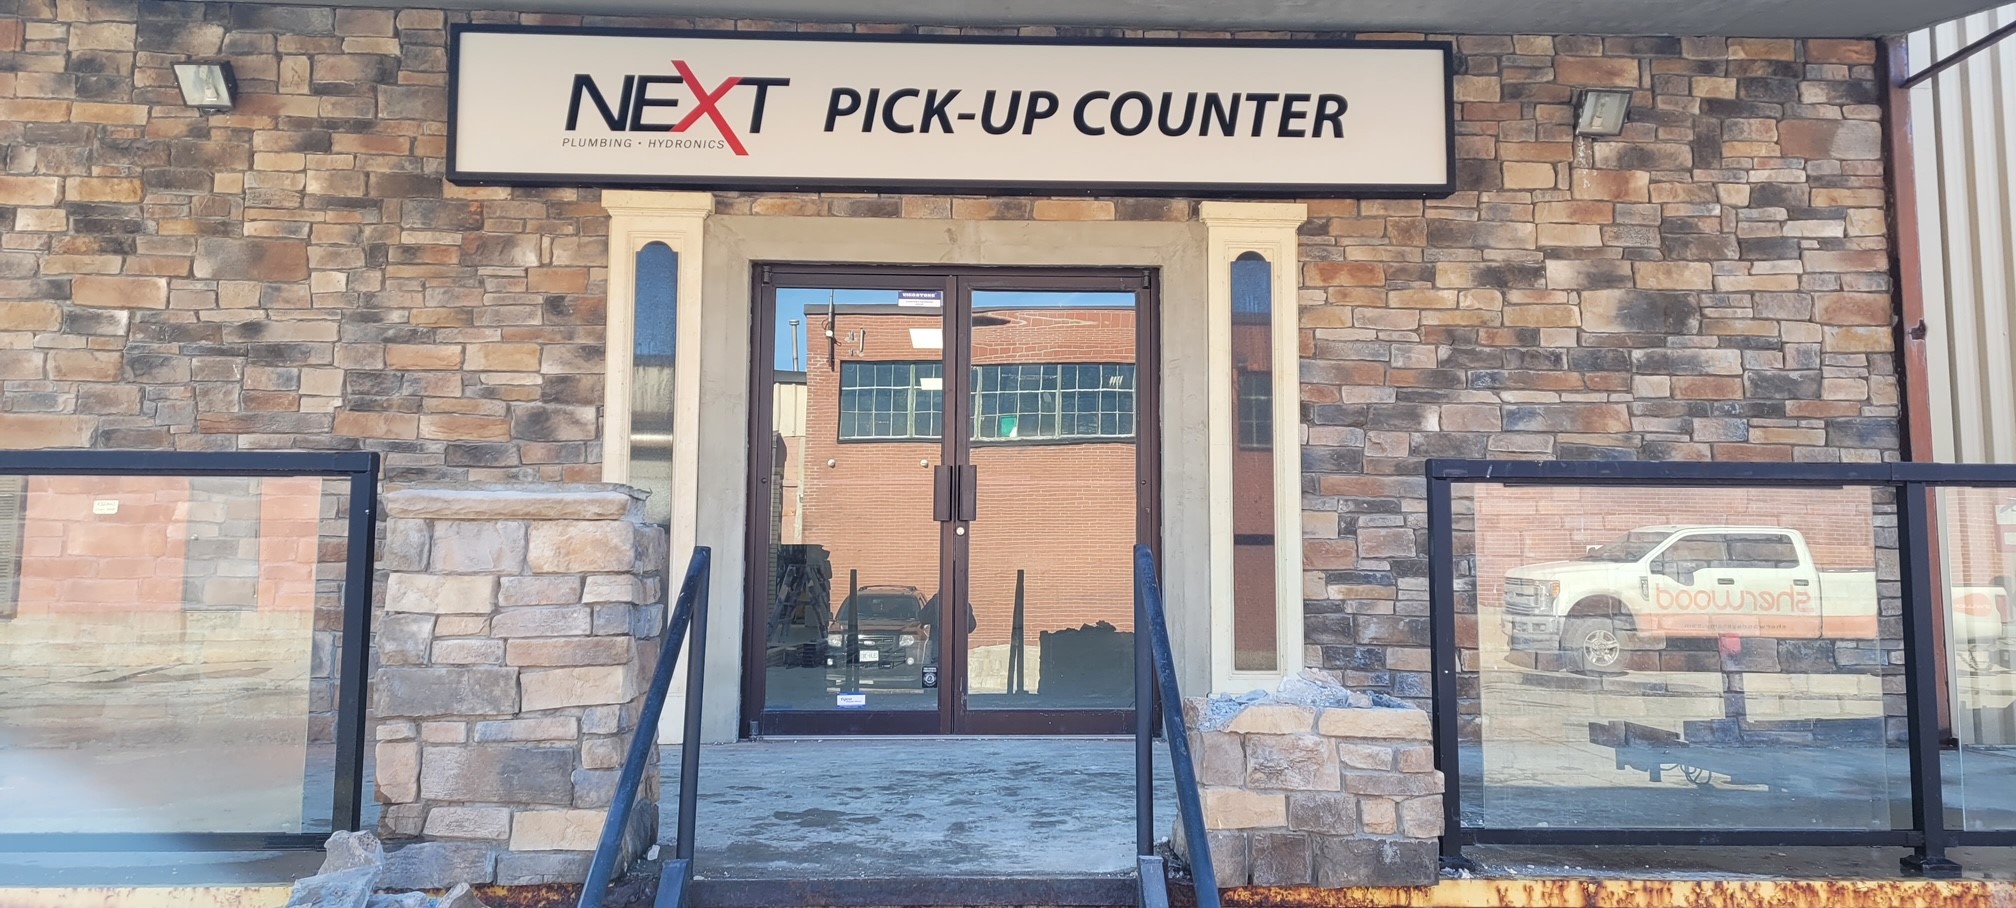 Pick up counter sign in